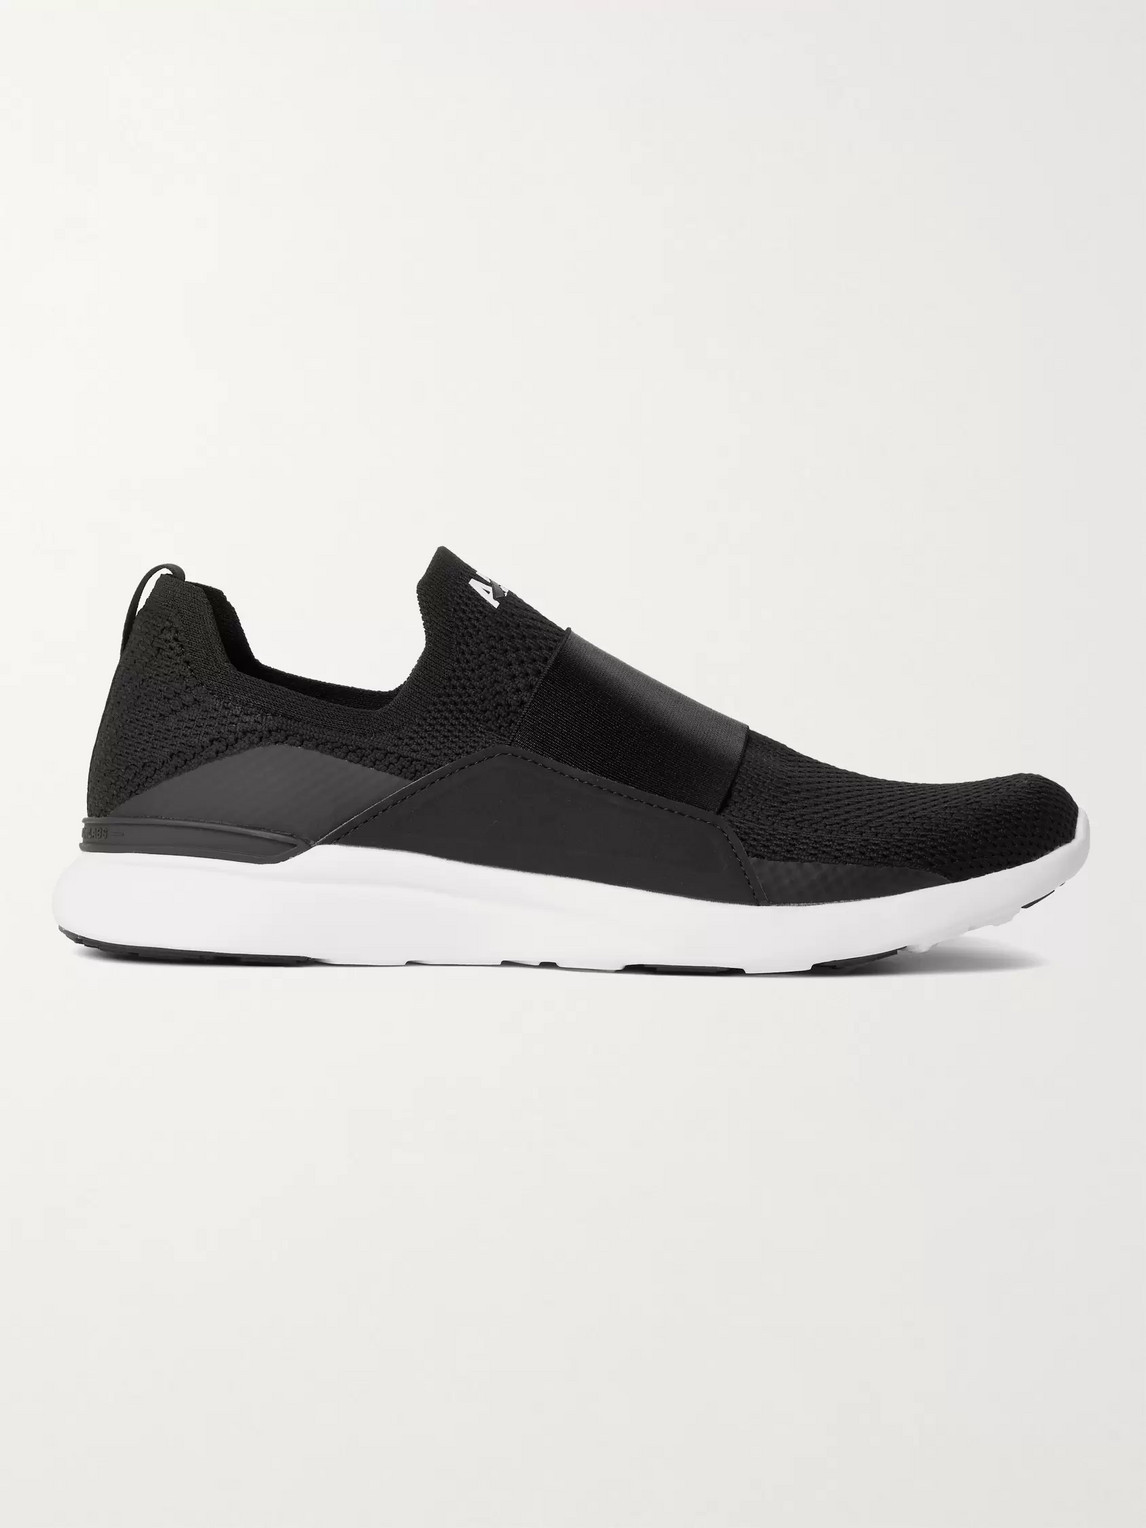 APL ATHLETIC PROPULSION LABS BLISS TECHLOOM SLIP-ON RUNNING trainers